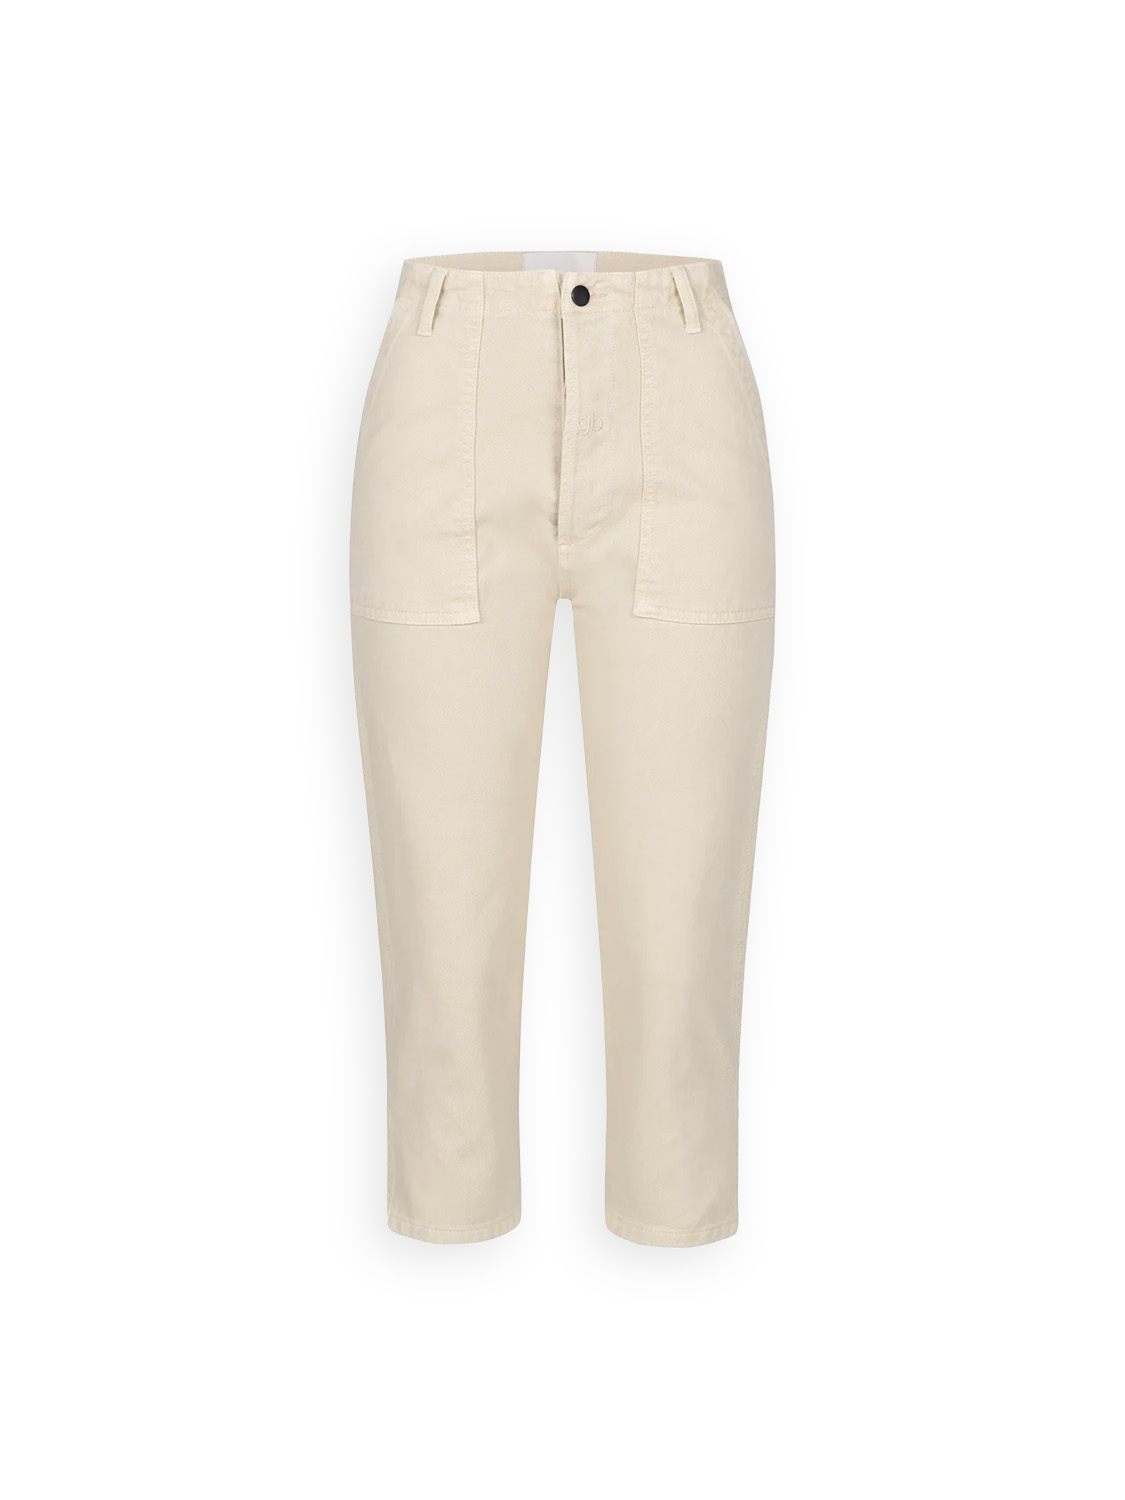 Gitta Banko Pants Harlow -stretchy cotton trousers in ¾ length  beige XS/S